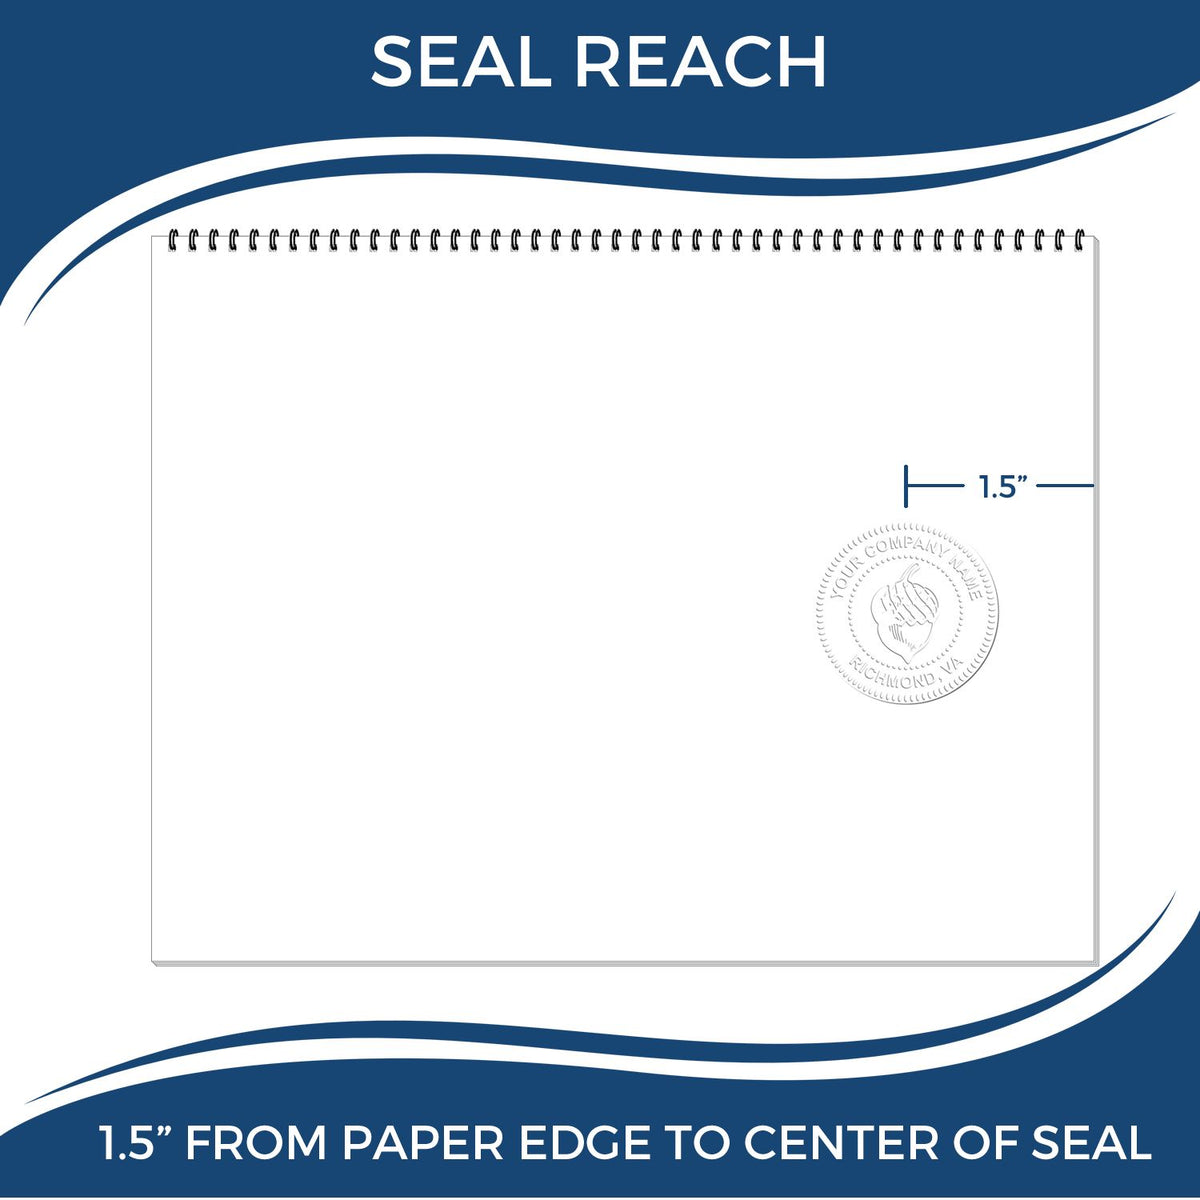 An infographic showing the seal reach which is represented by a ruler and a miniature seal image of the Gift Texas Land Surveyor Seal